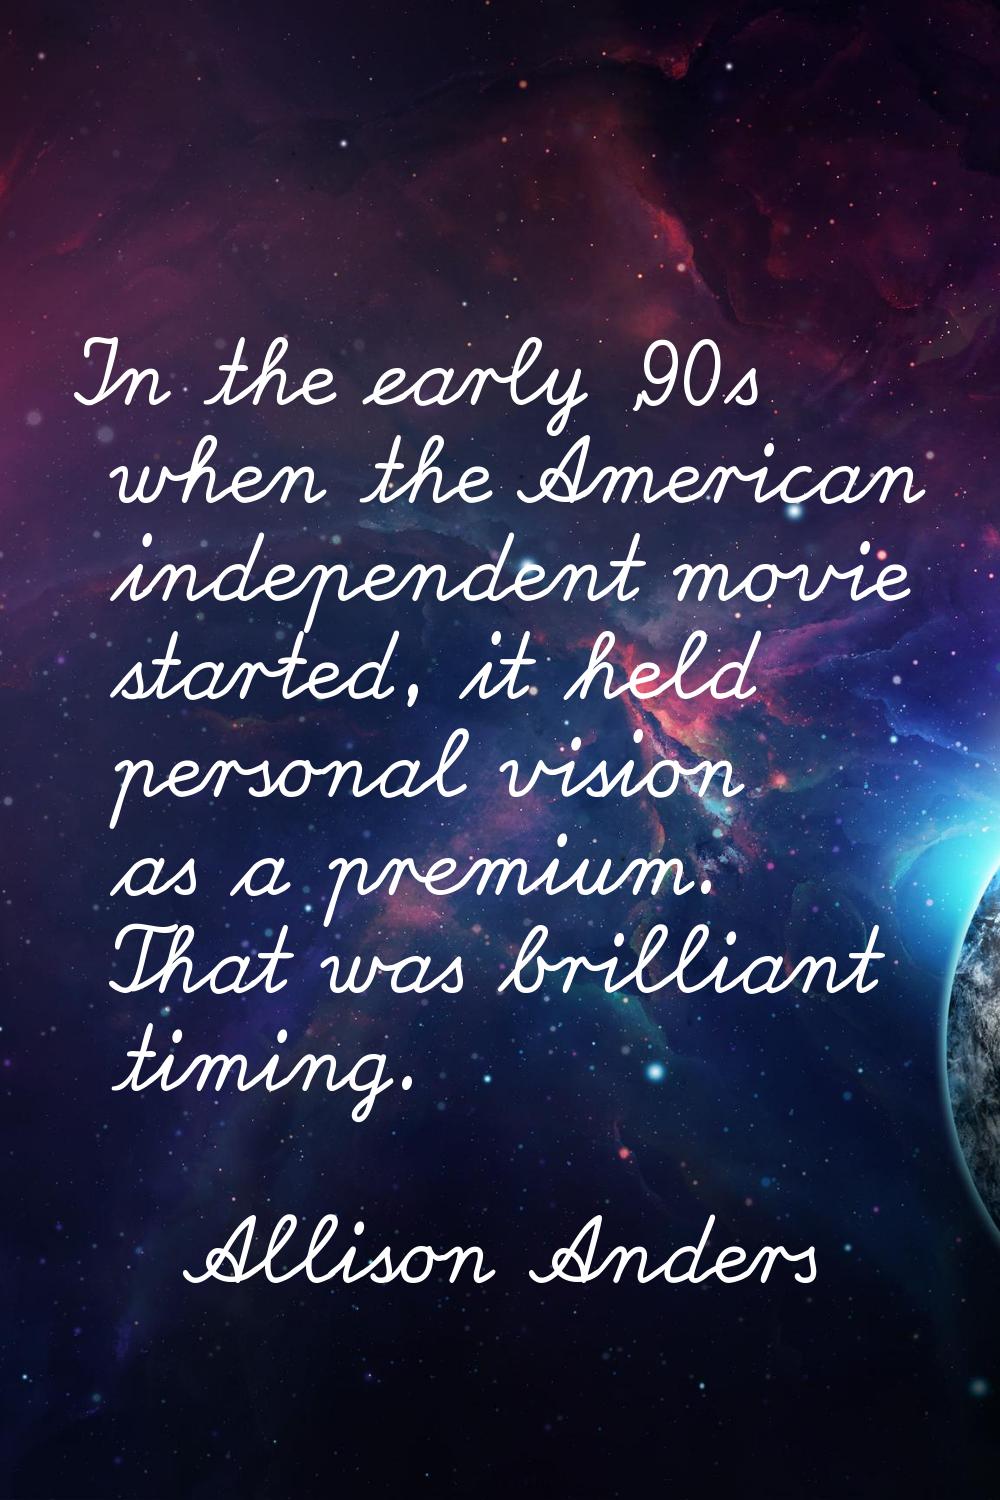 In the early '90s when the American independent movie started, it held personal vision as a premium